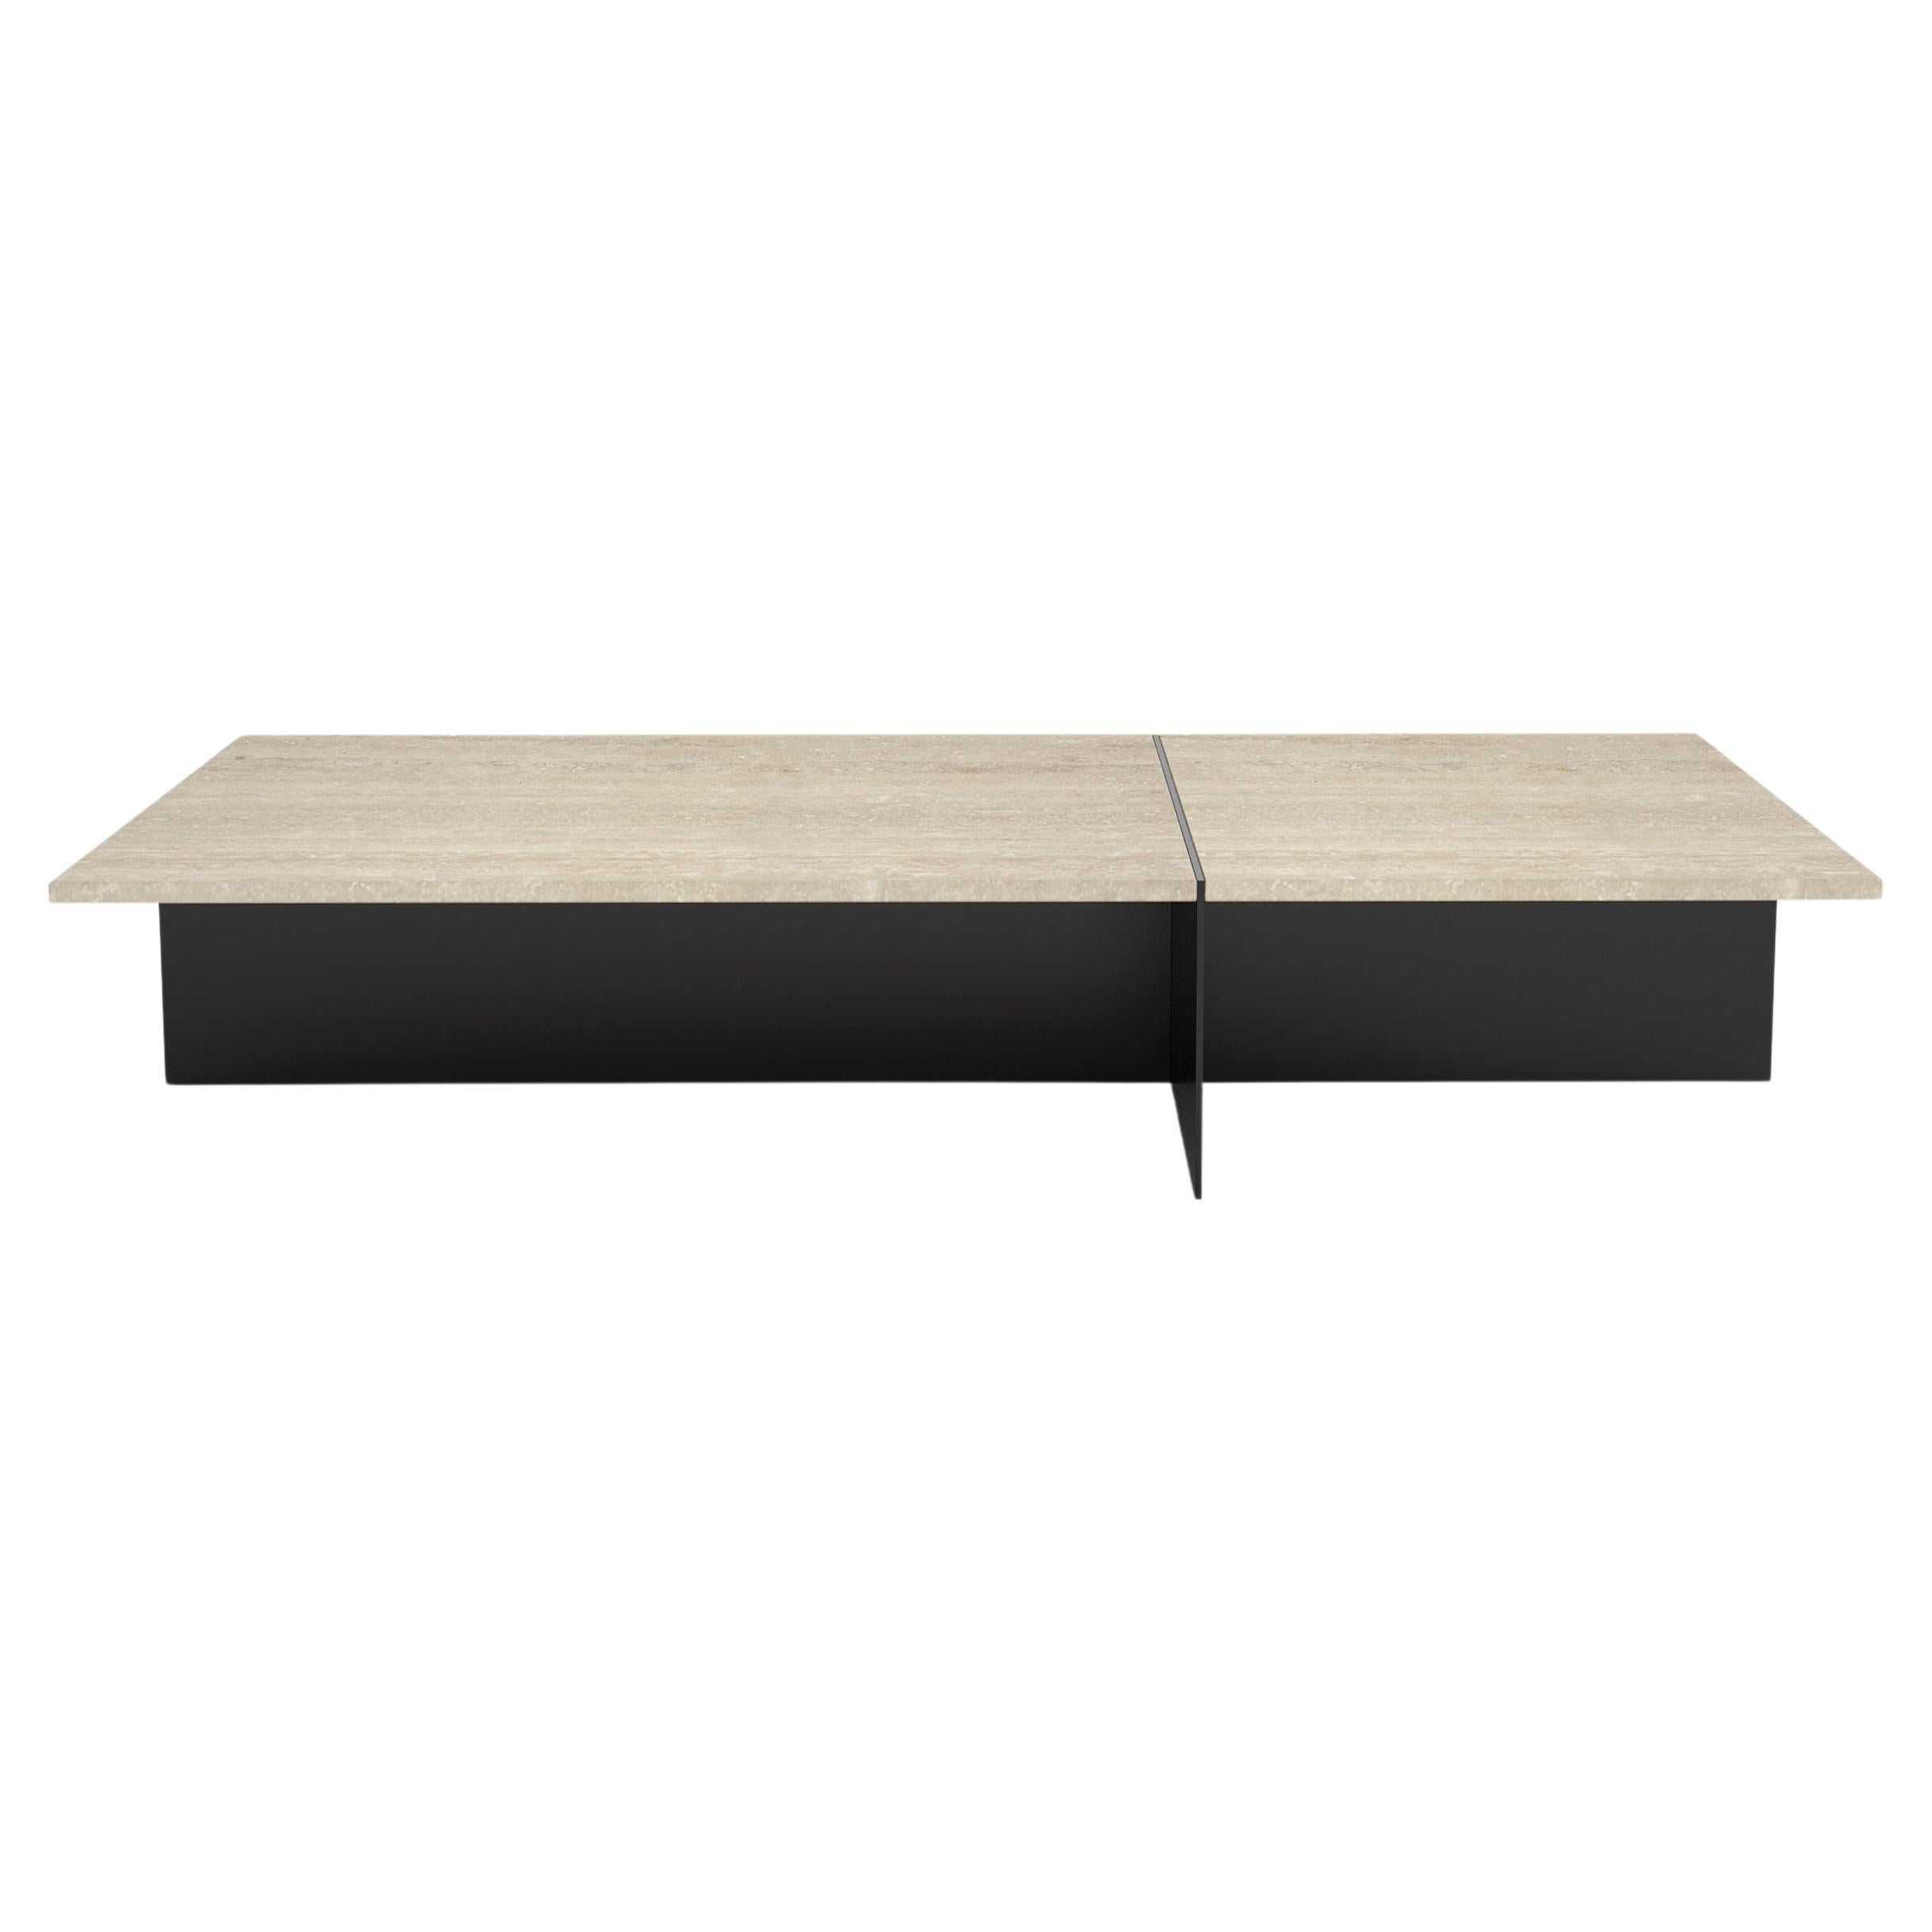 Division Rectangular Coffee Table by Phase Design